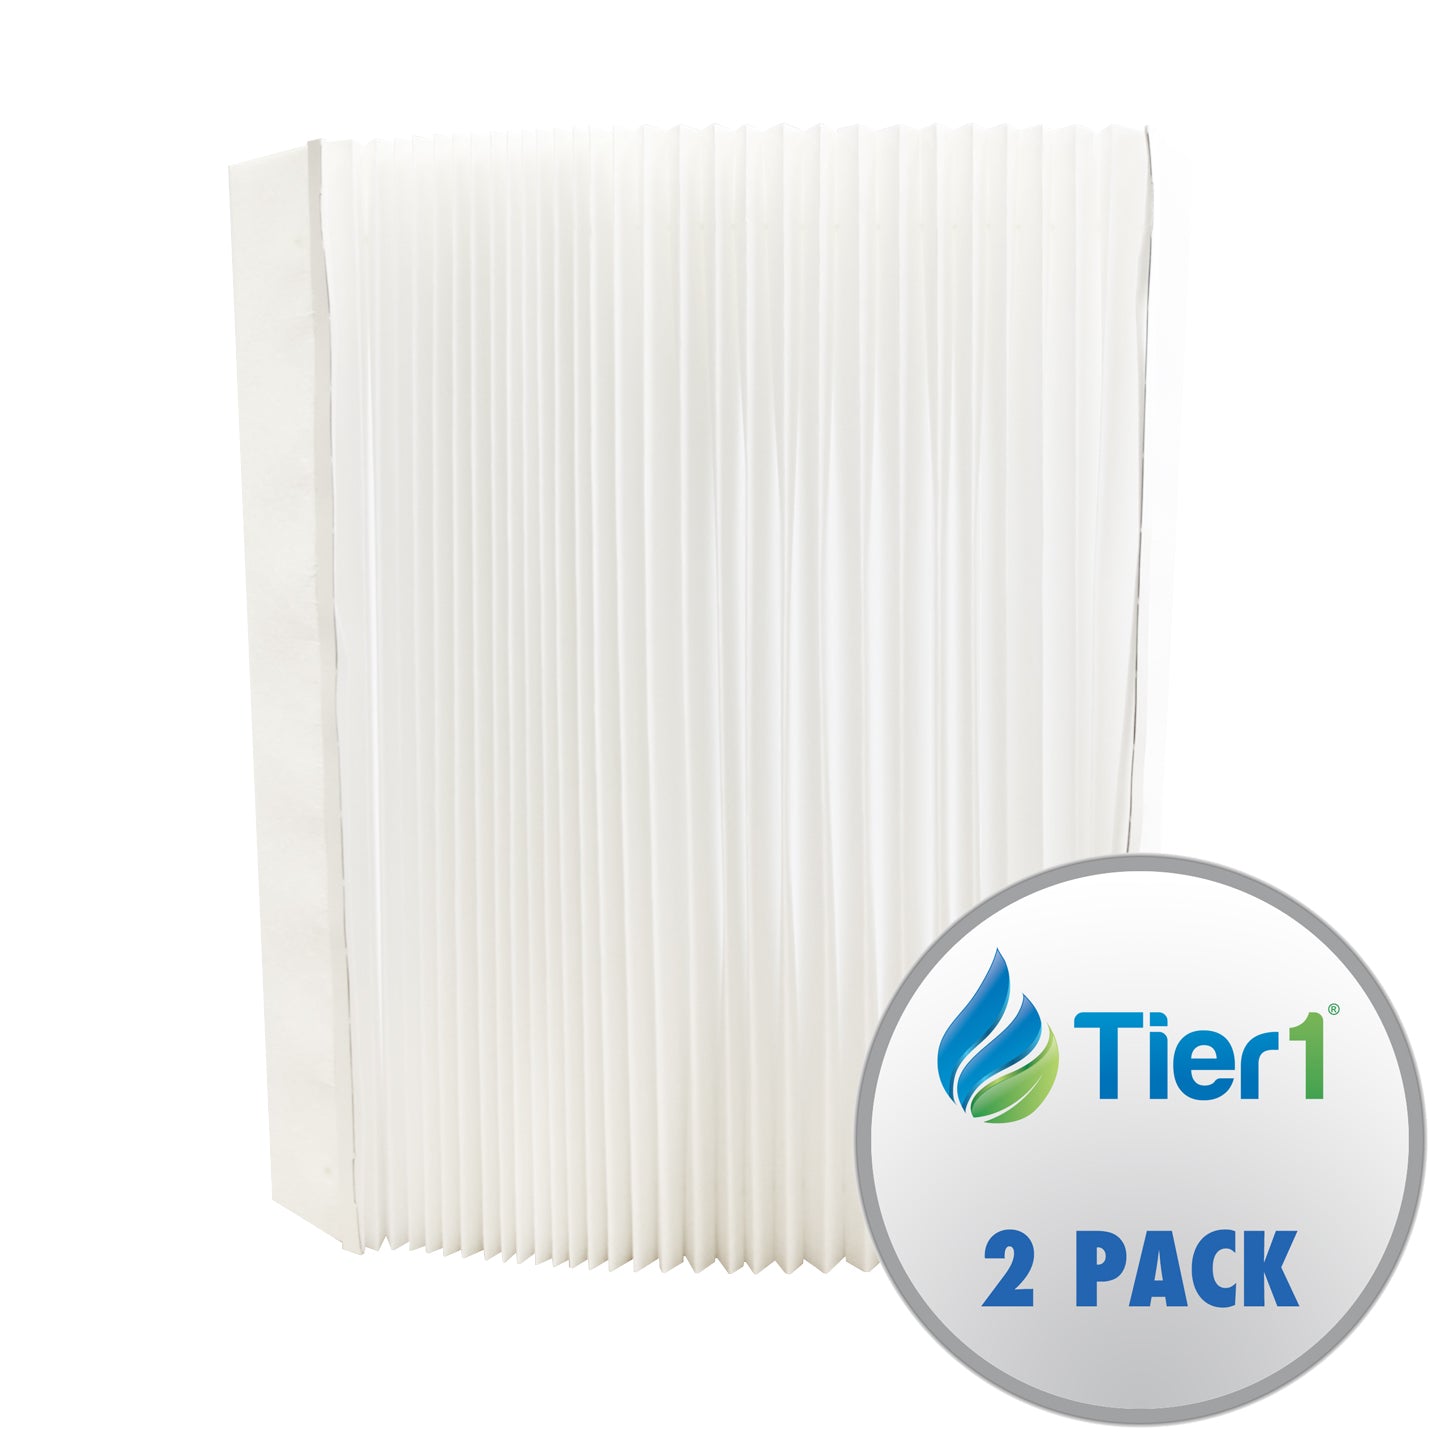 Air Filter 401 Aprilaire Comparable Replacement Filter by Tier1 (2-Pack)